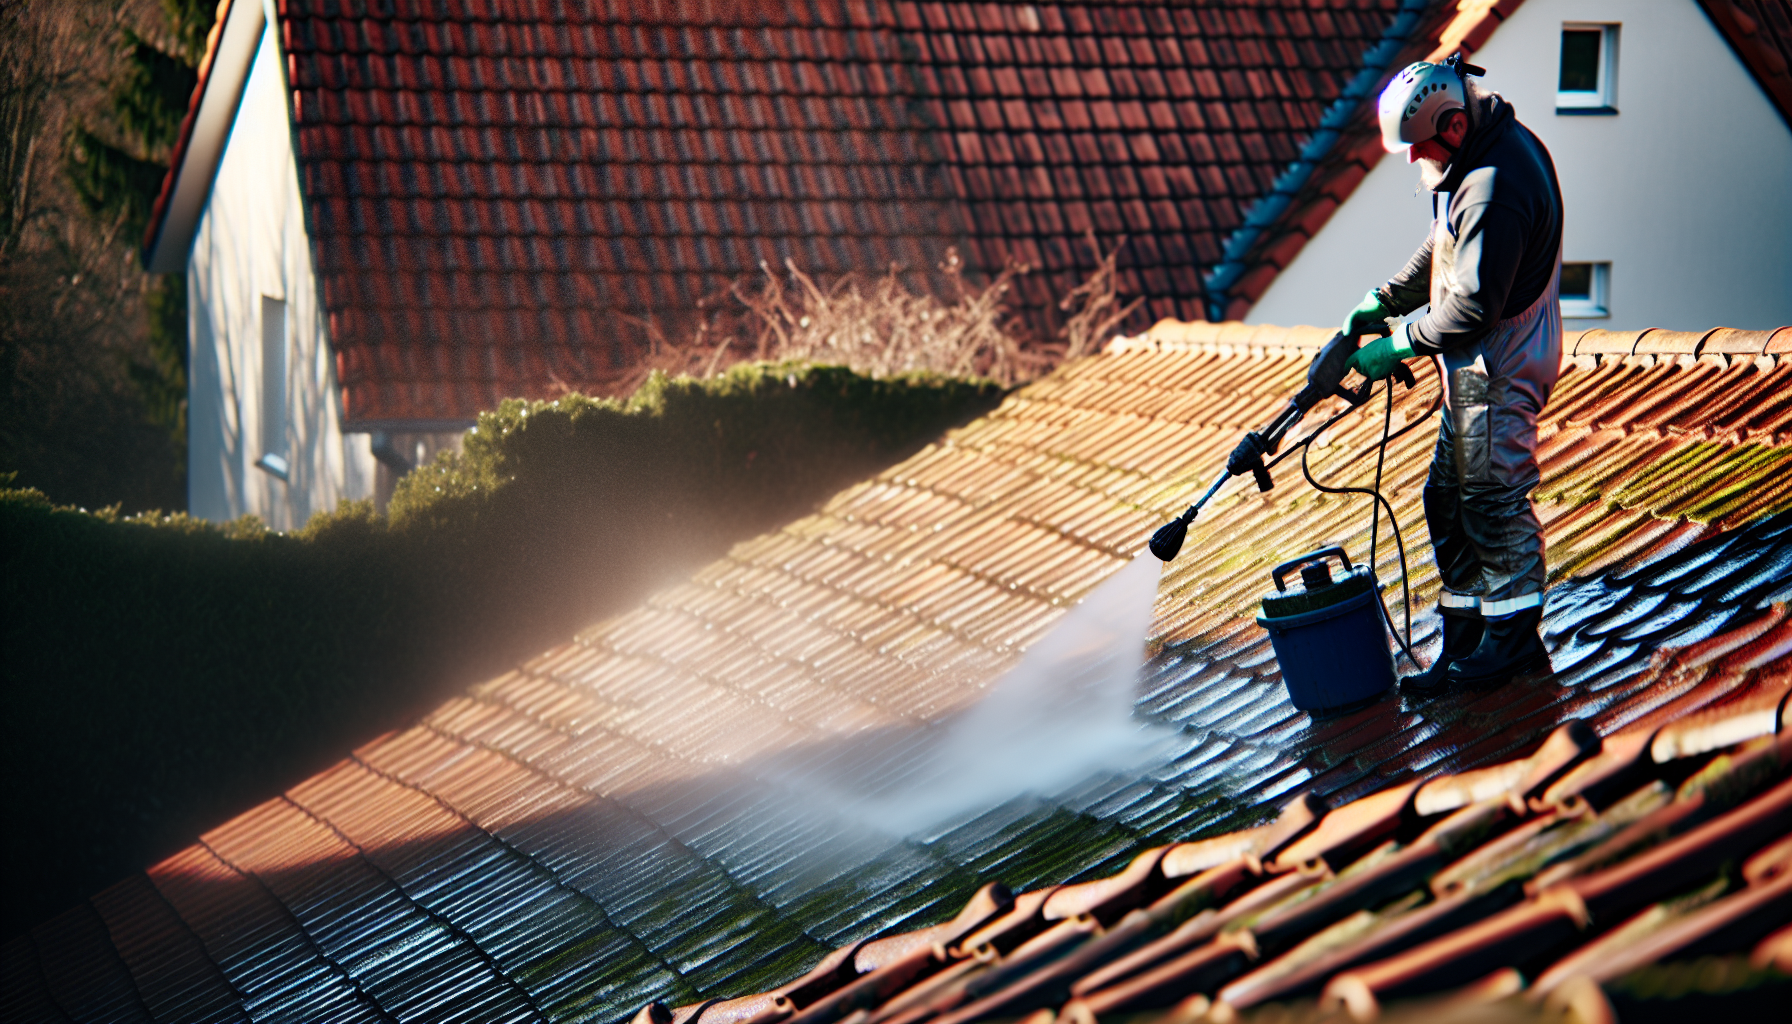 Photo of a pressure washing equipment for roof cleaning